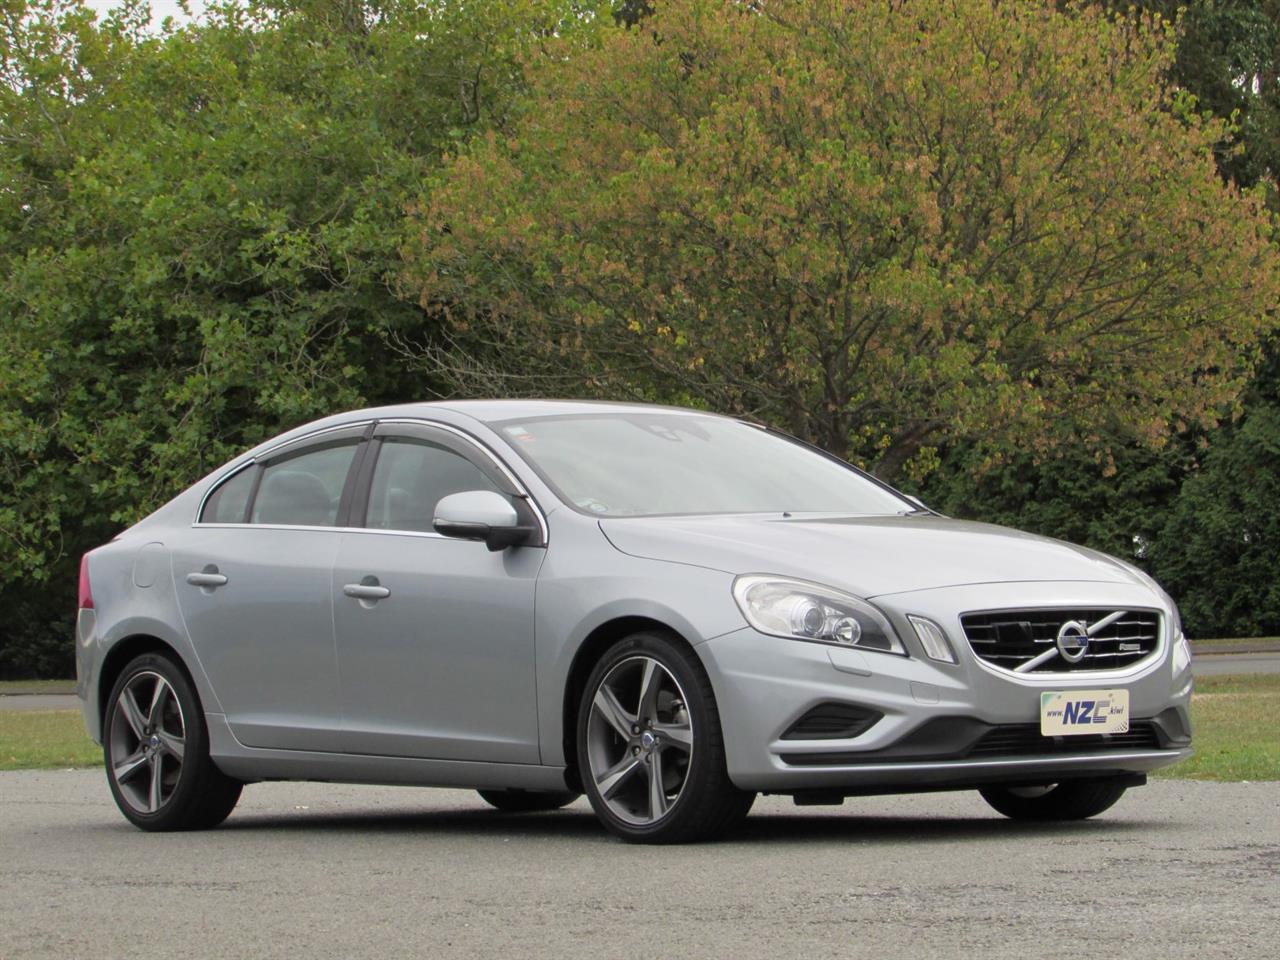 NZC best hot price for 2012 Volvo S60 in Christchurch